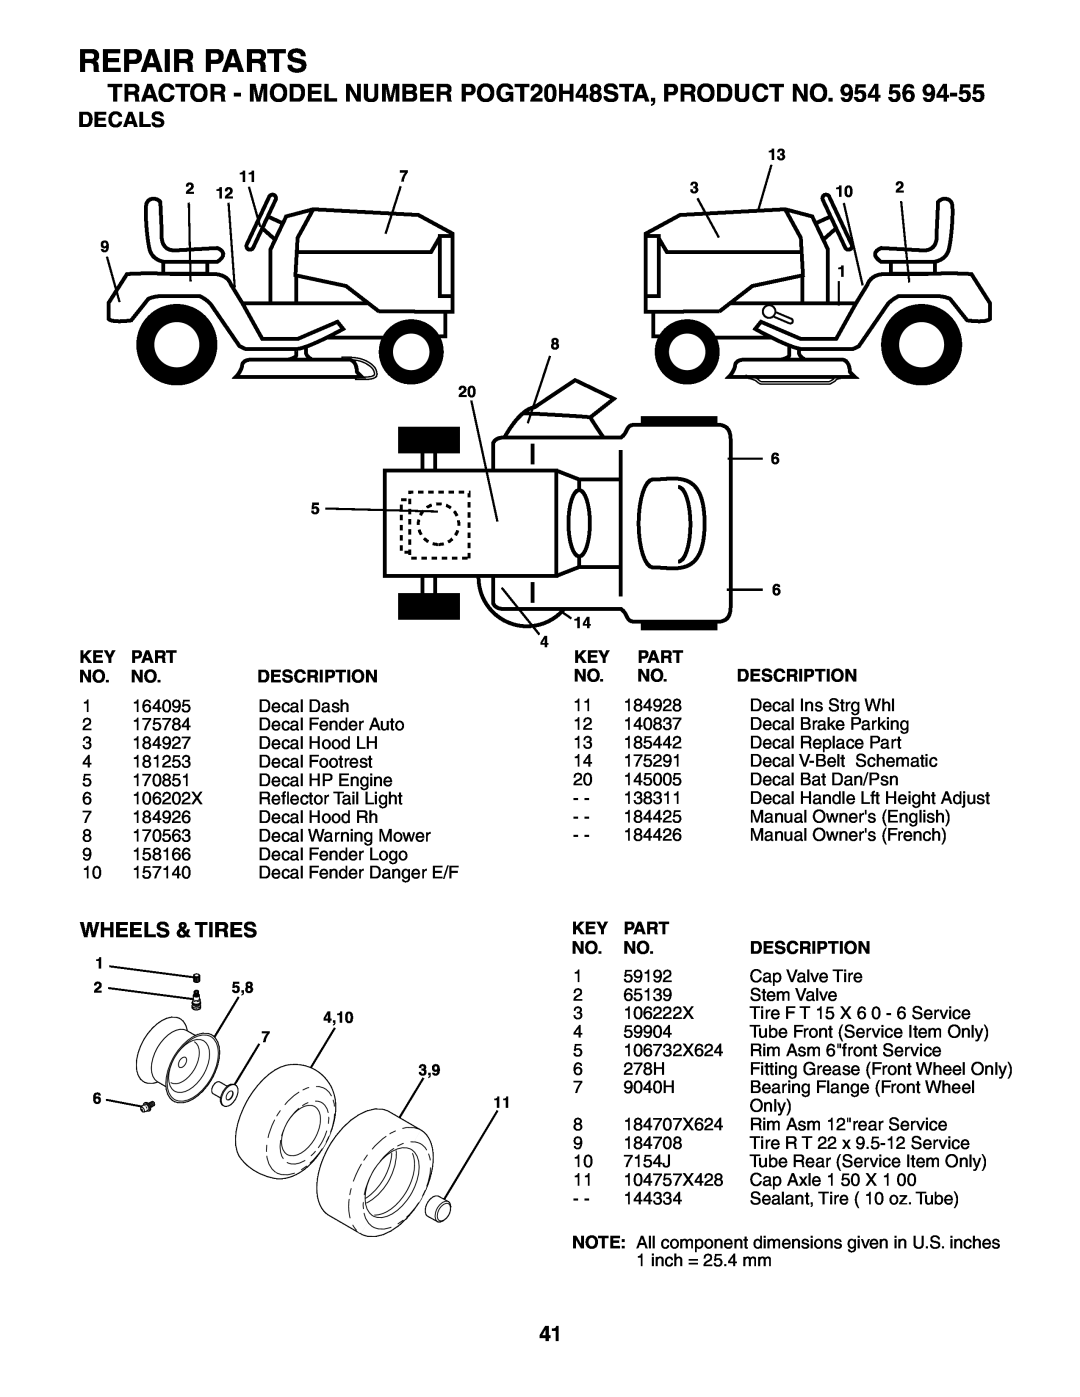 Poulan 184425, 954569455 manual Decals, Wheels & Tires, Repair Parts, TRACTOR - MODEL NUMBER POGT20H48STA, PRODUCT NO. 954 